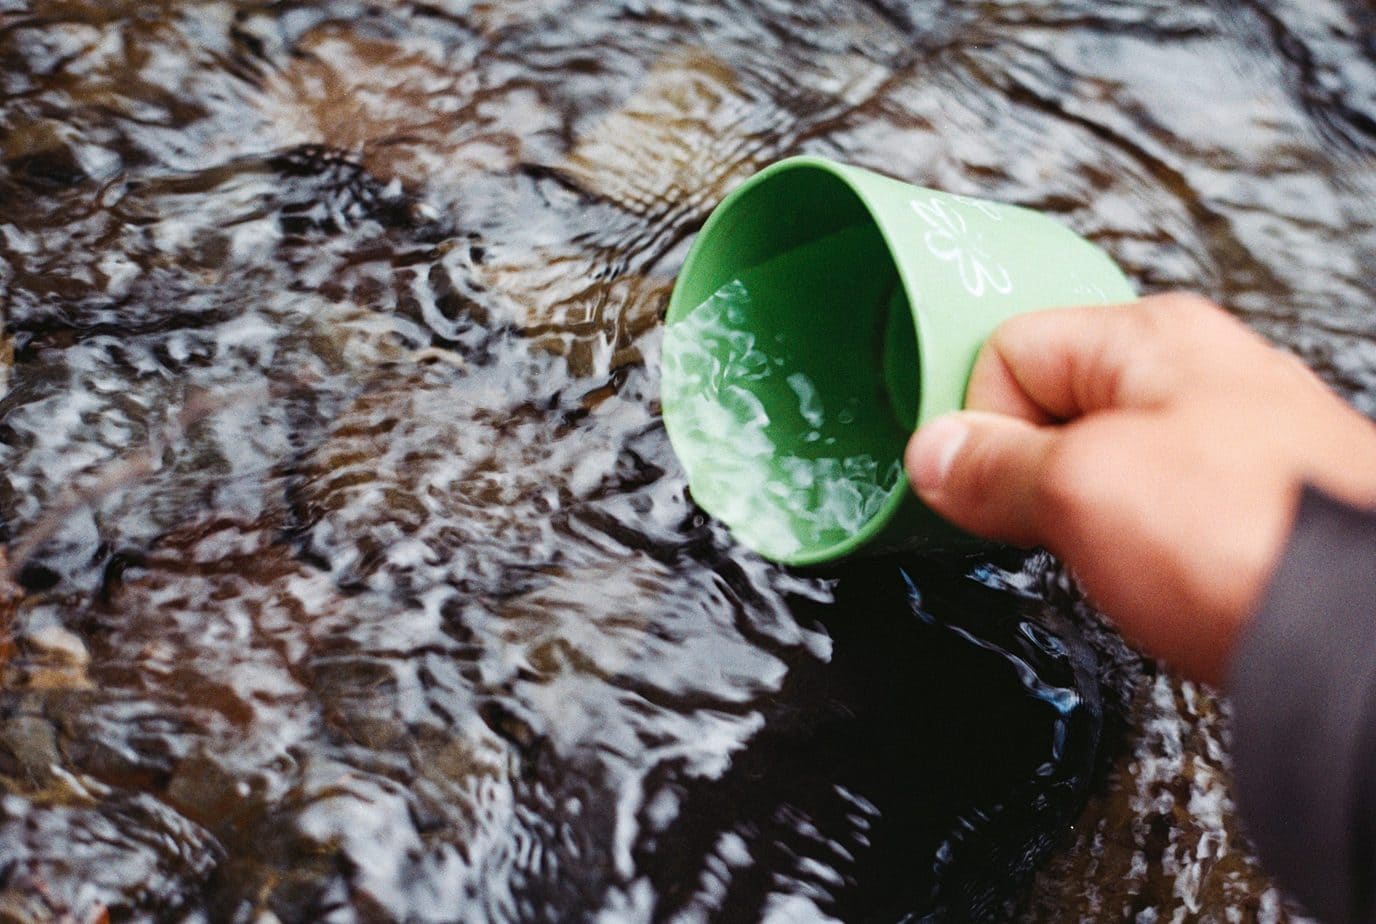 The ABCs of survivalism: How to obtain and treat water in the field?